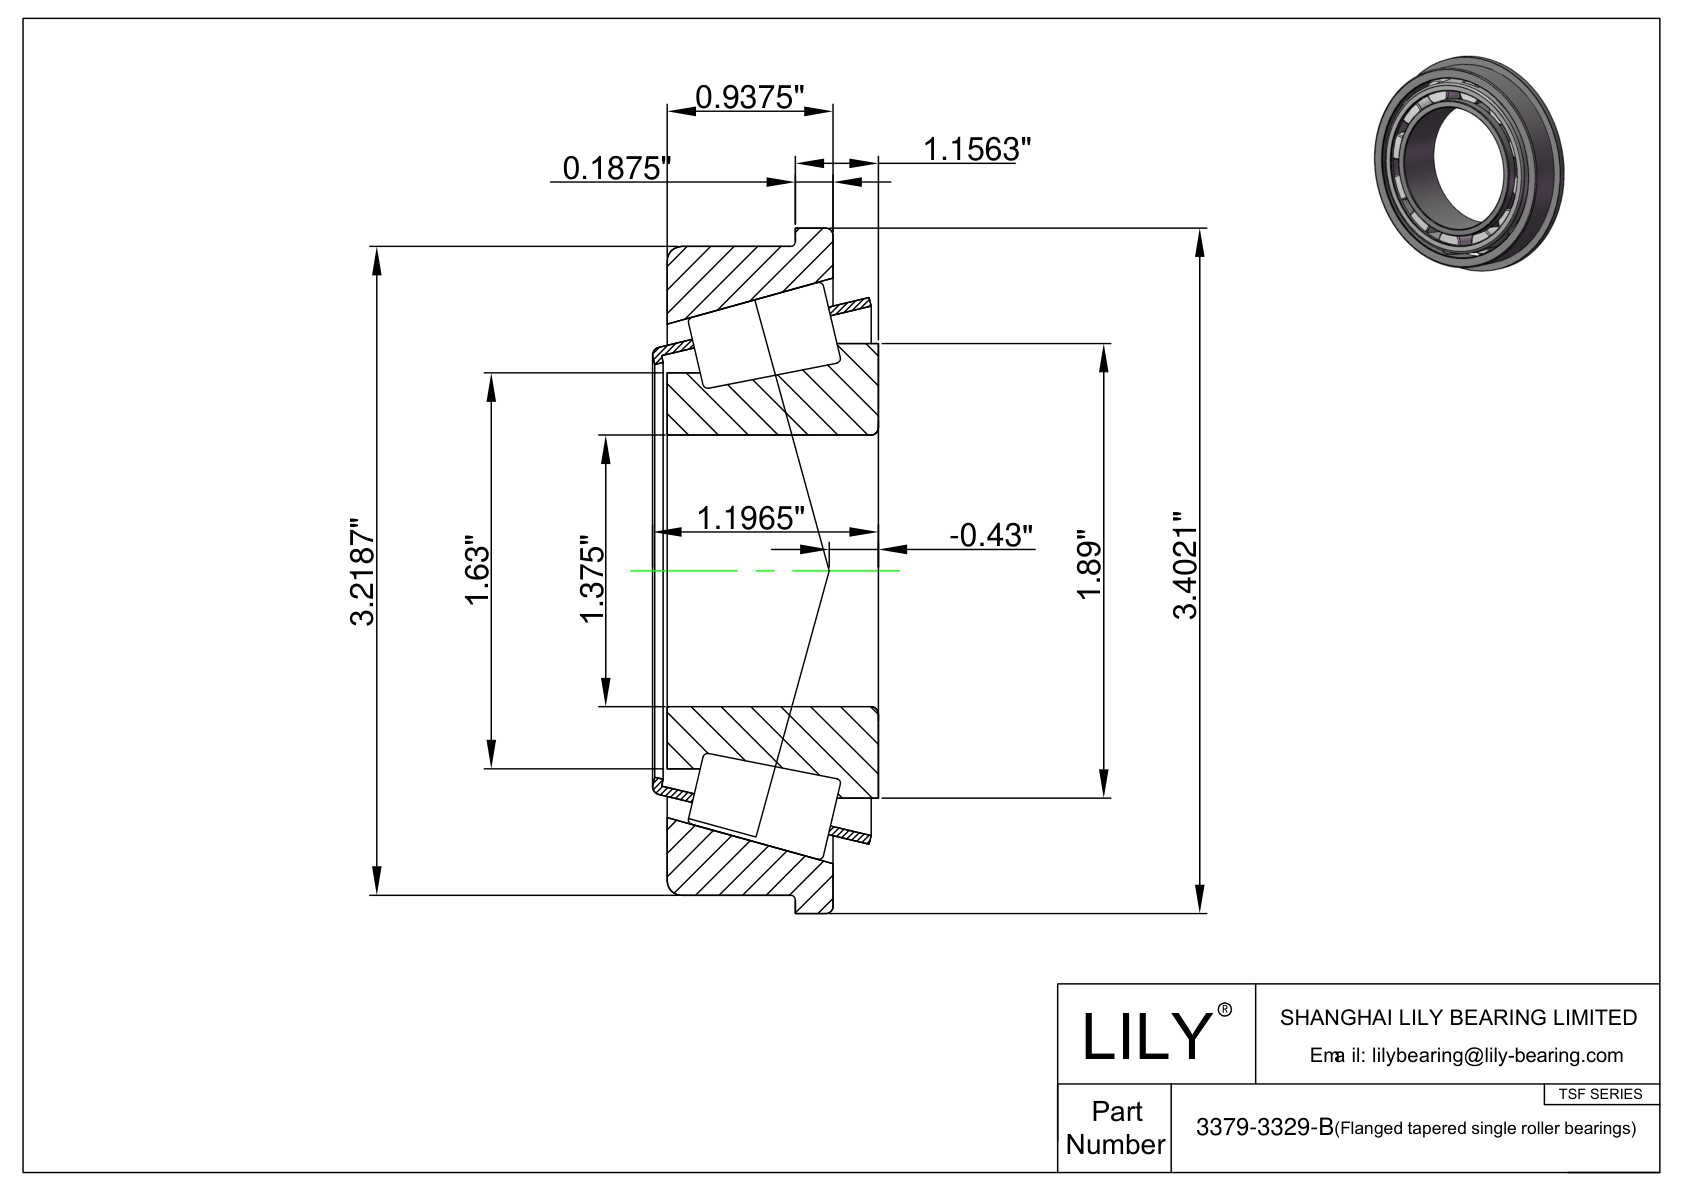 3379-3329-B TSF (Tapered Single Roller Bearings with Flange) (Imperial) cad drawing